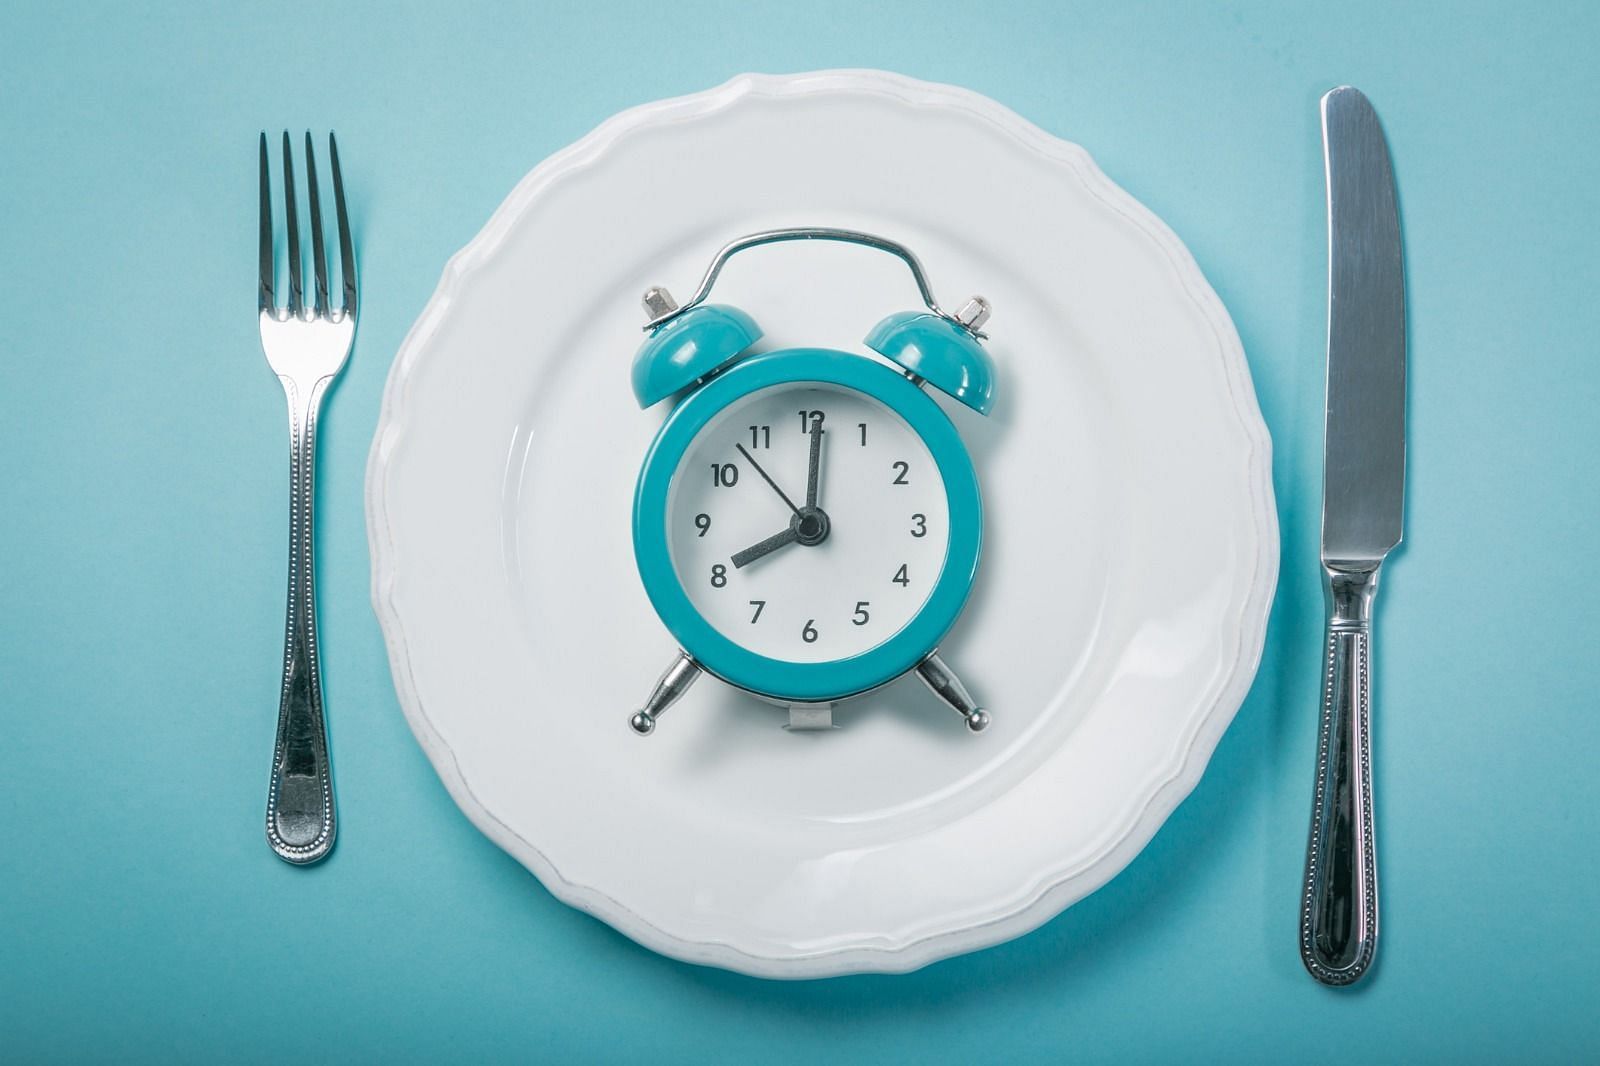 Tips for intermittent fasting (Image via Getty Images)